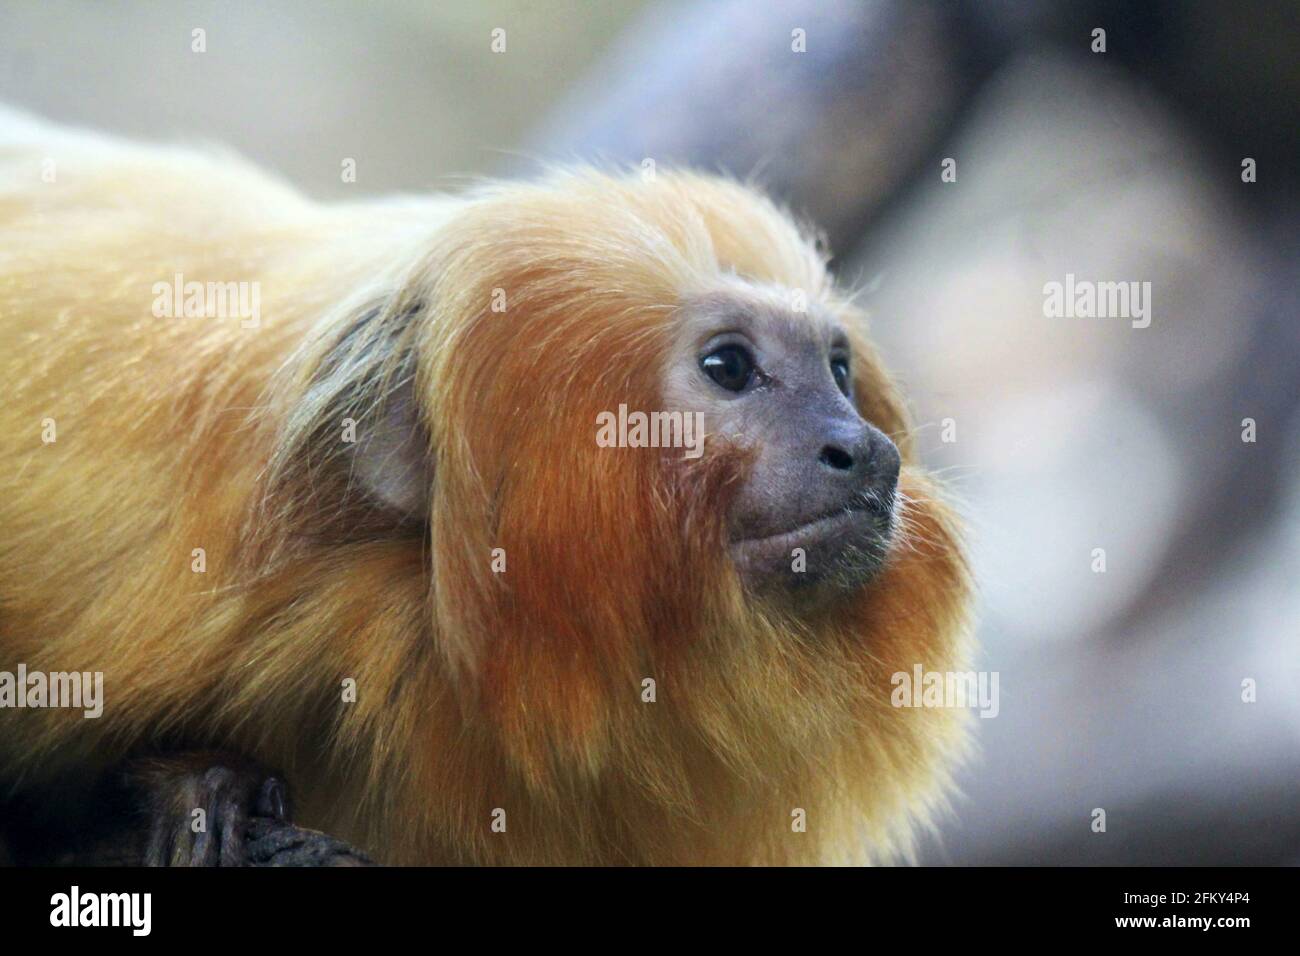 Golden lion tamarin, Leontopithecus rosalia also known as the golden marmoset. Native to the coastal forests of Brazil. Endangered species Stock Photo